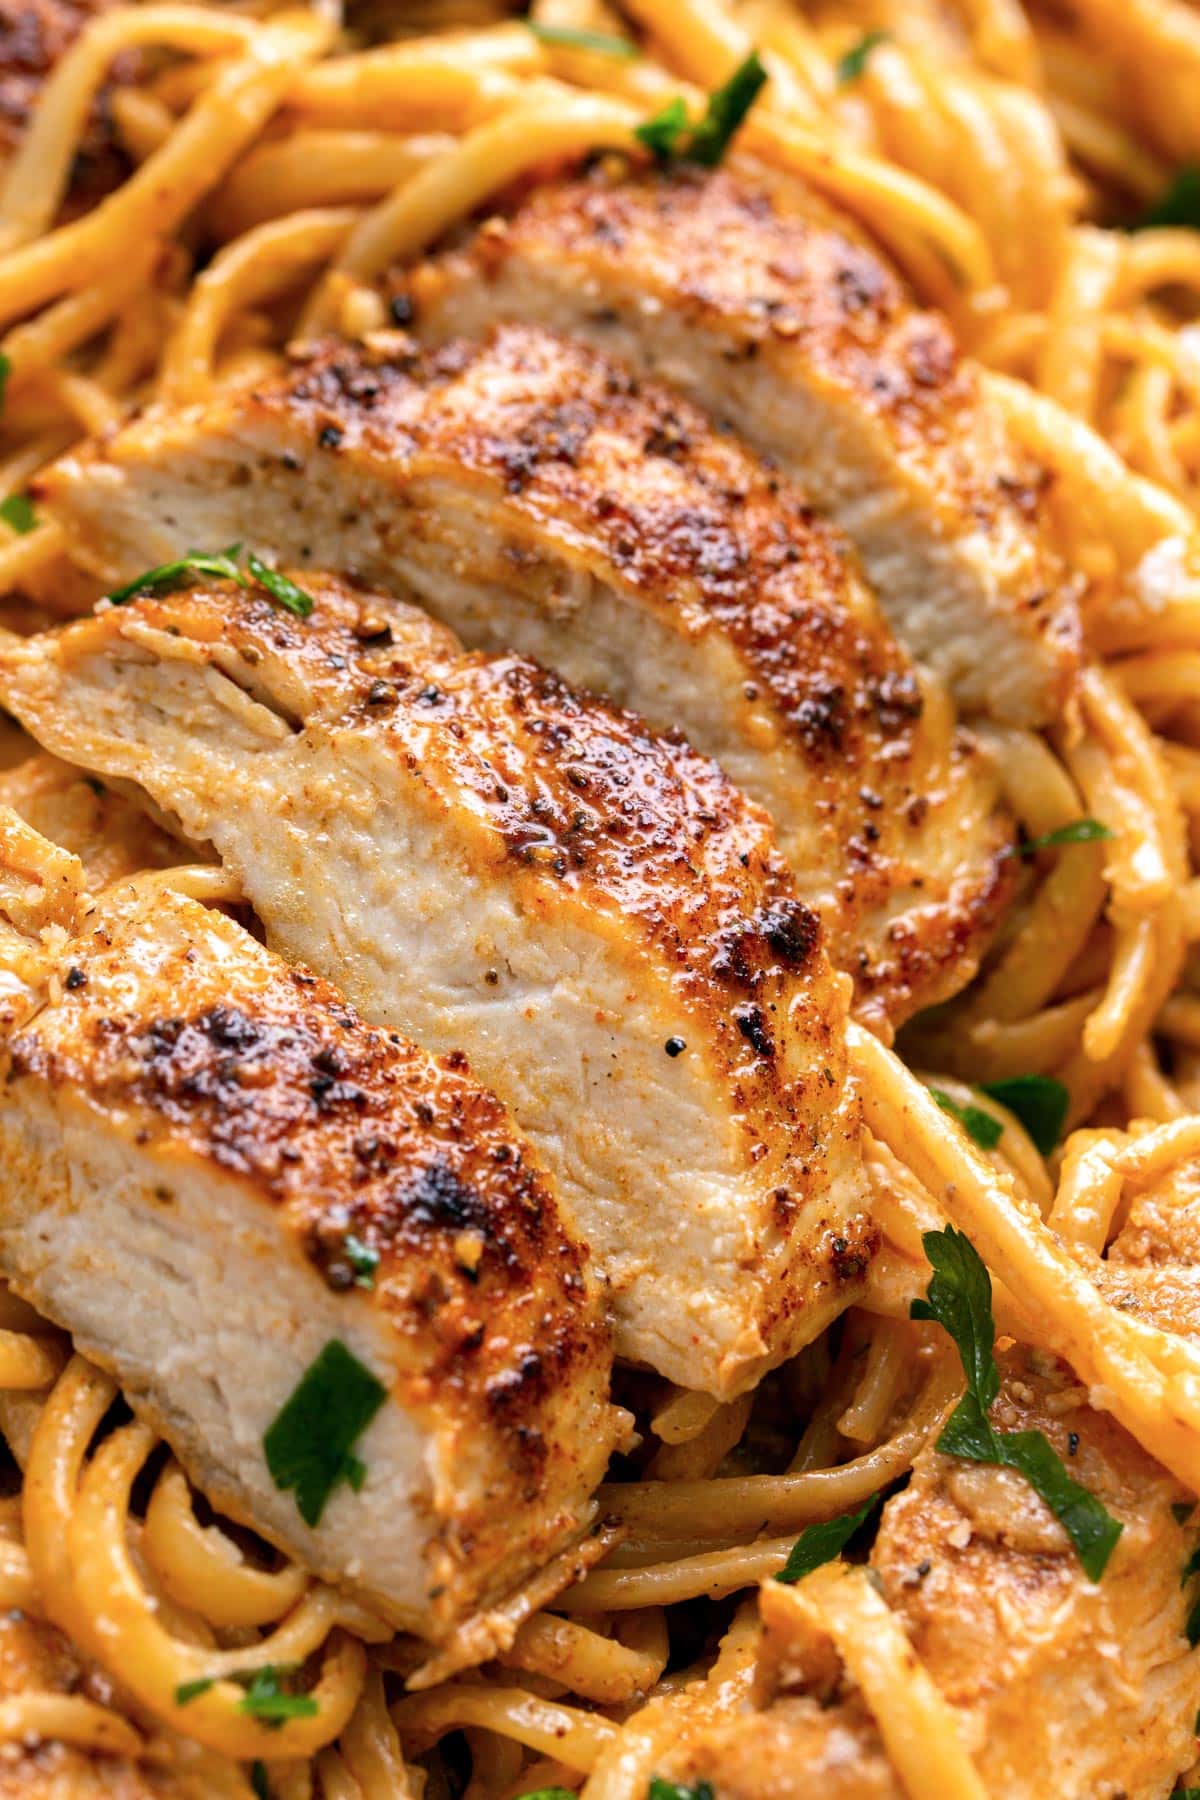 Thick slices of seared Cajun seasoned chicken on a bed of creamy pasta.